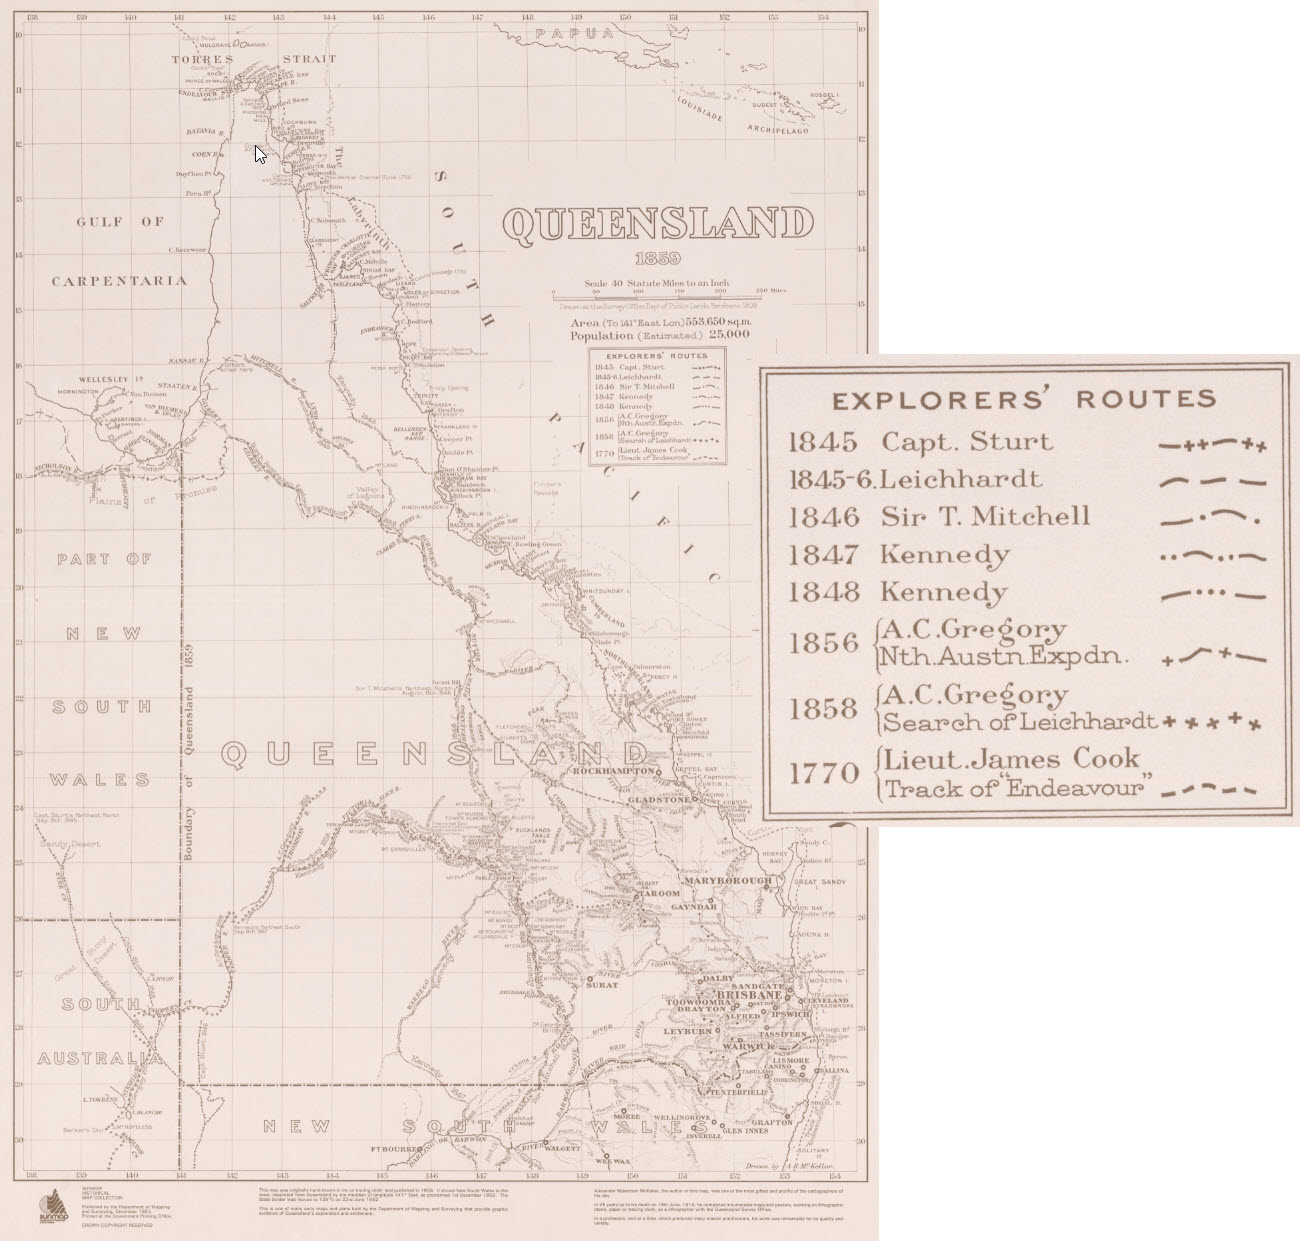 This map of Queensland shows the routes taken by early explorers.